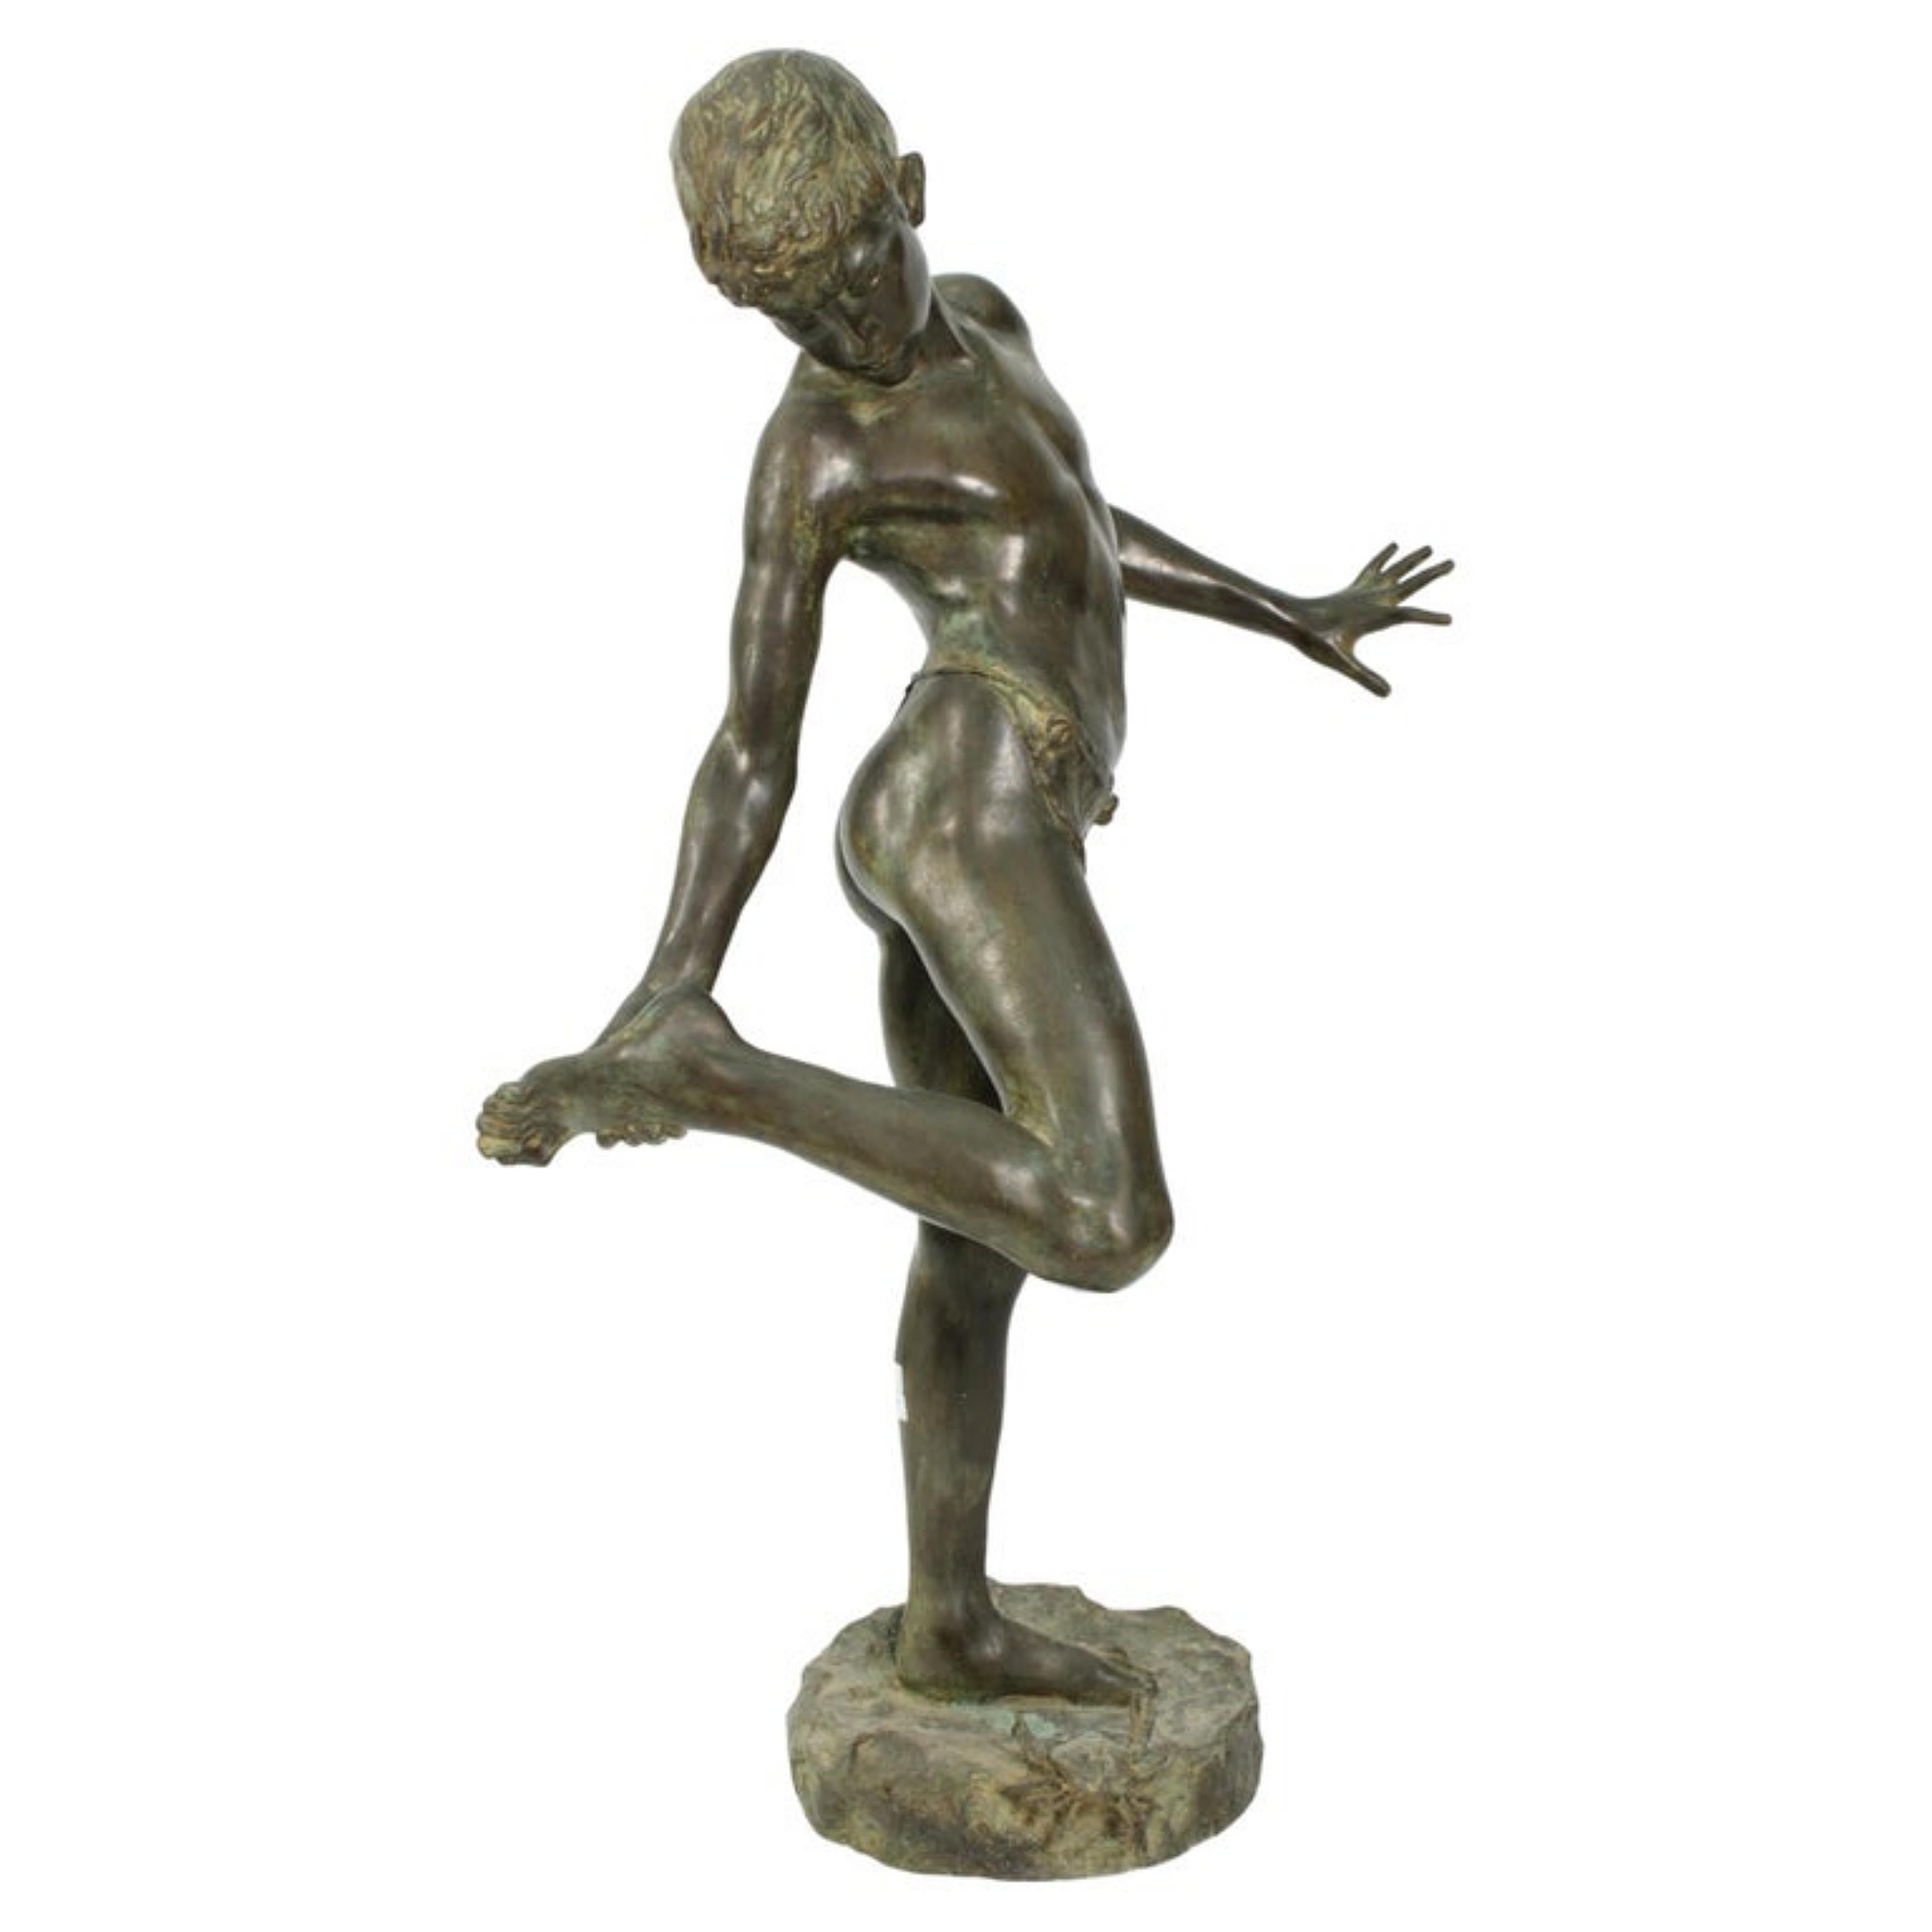 Hand-Crafted Spectacular Patinated Bronze SCULPTURE 